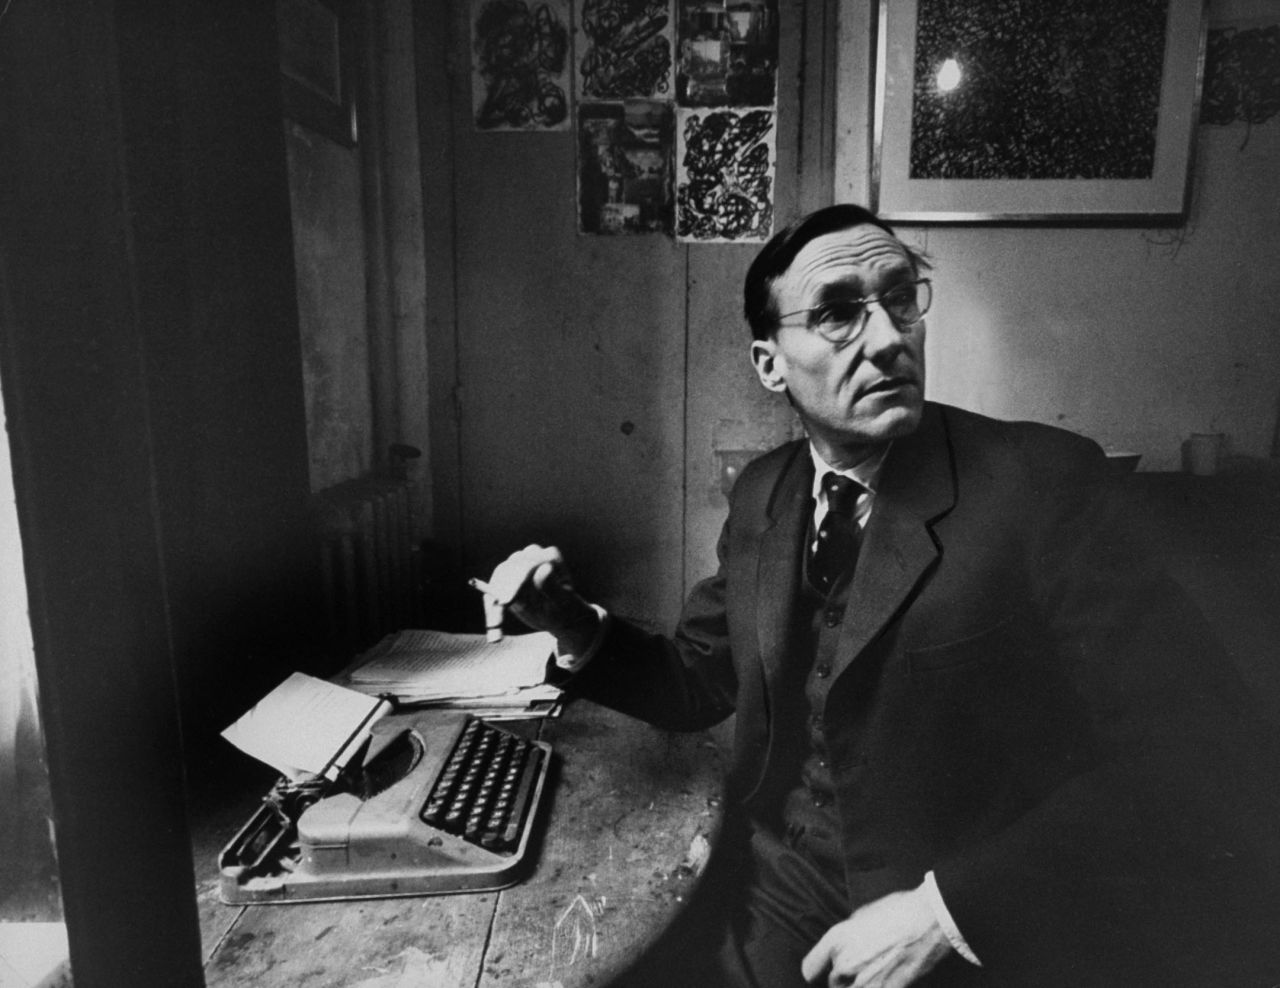 Author William S. Burroughs sits with a typewriter in 1959.